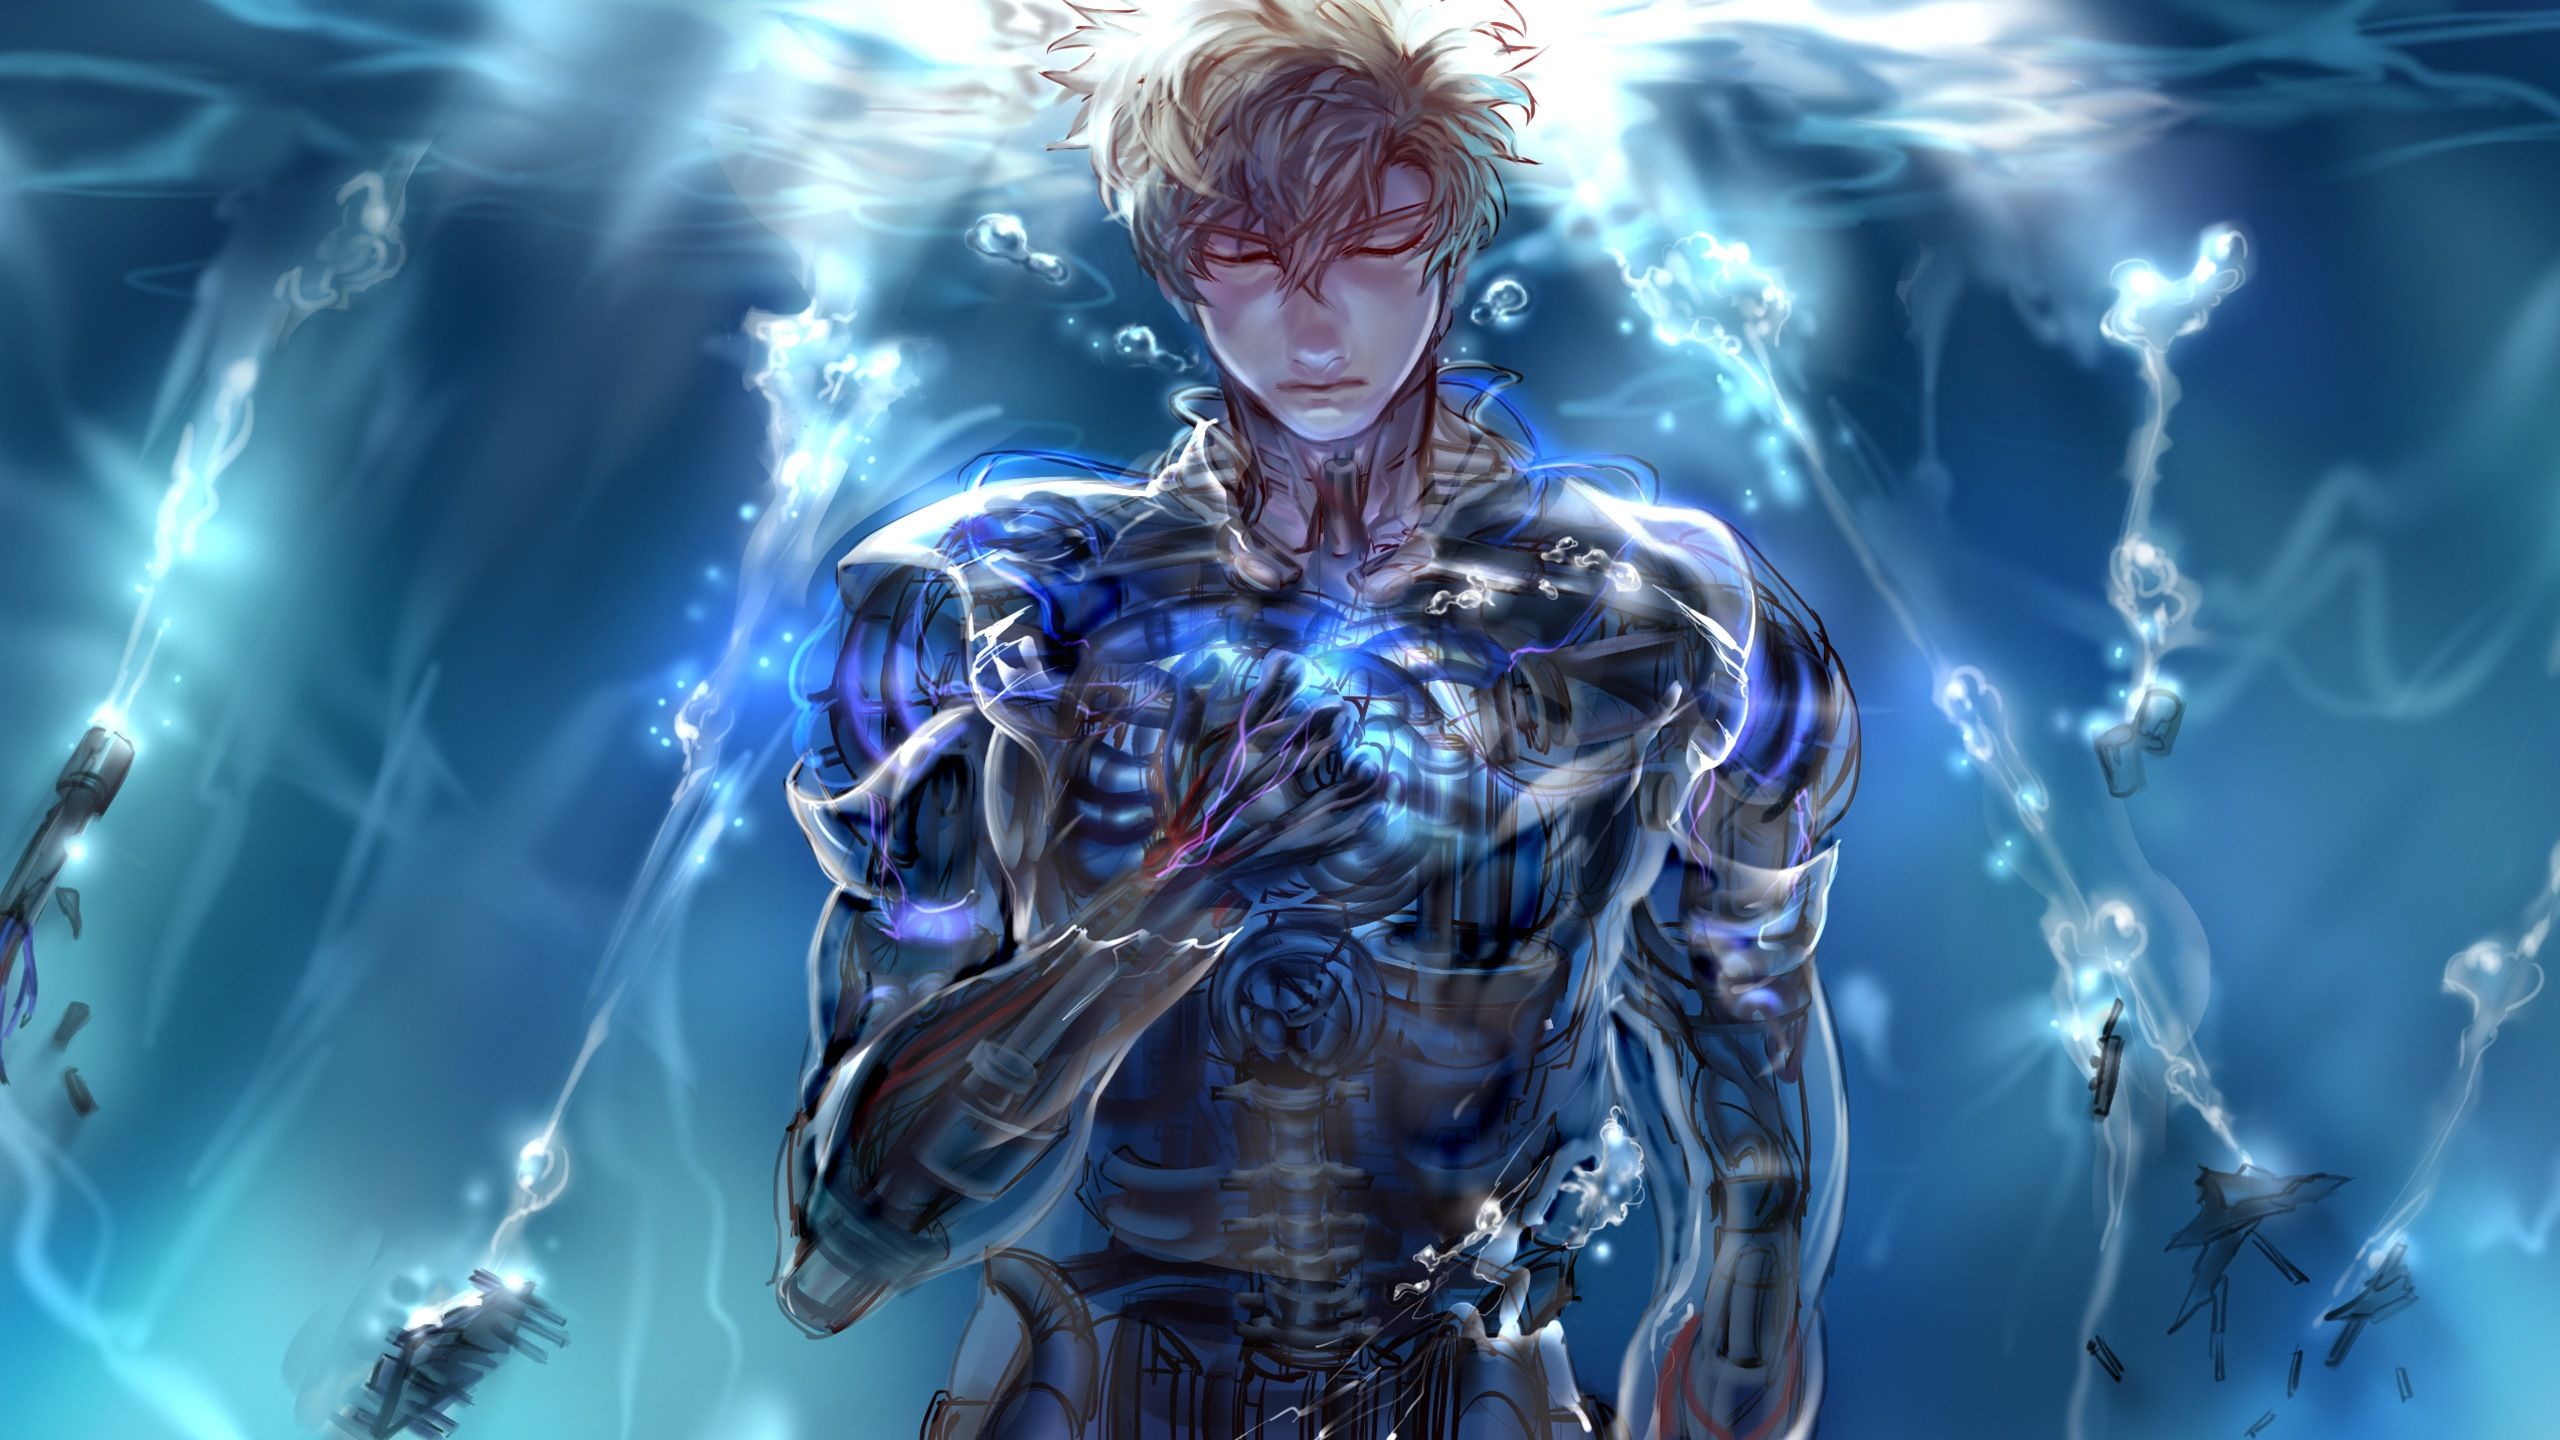 Genos One 4K Wallpaper For Your Desktop Or Mobile Screen Free And Easy To Download